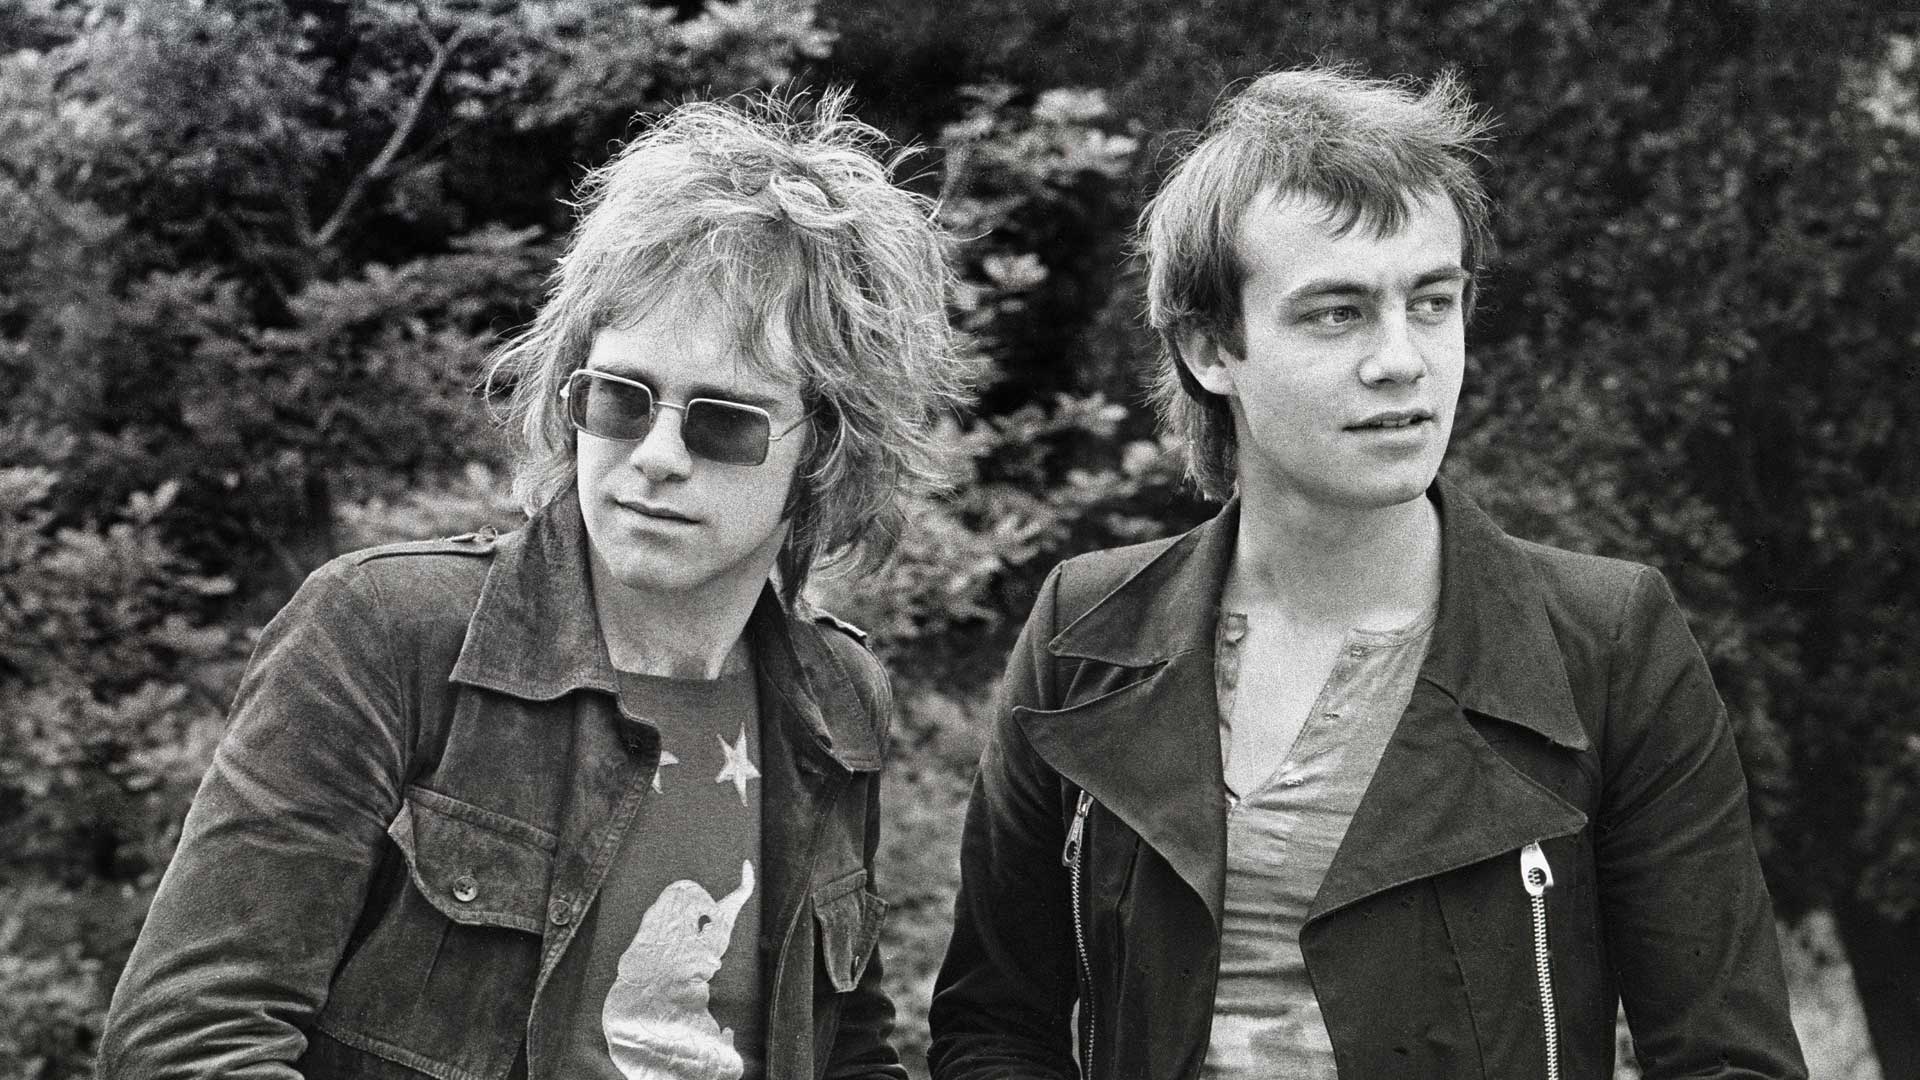 The Library of Congress Gershwin Prize for Popular Song: Elton John & Bernie Taupin